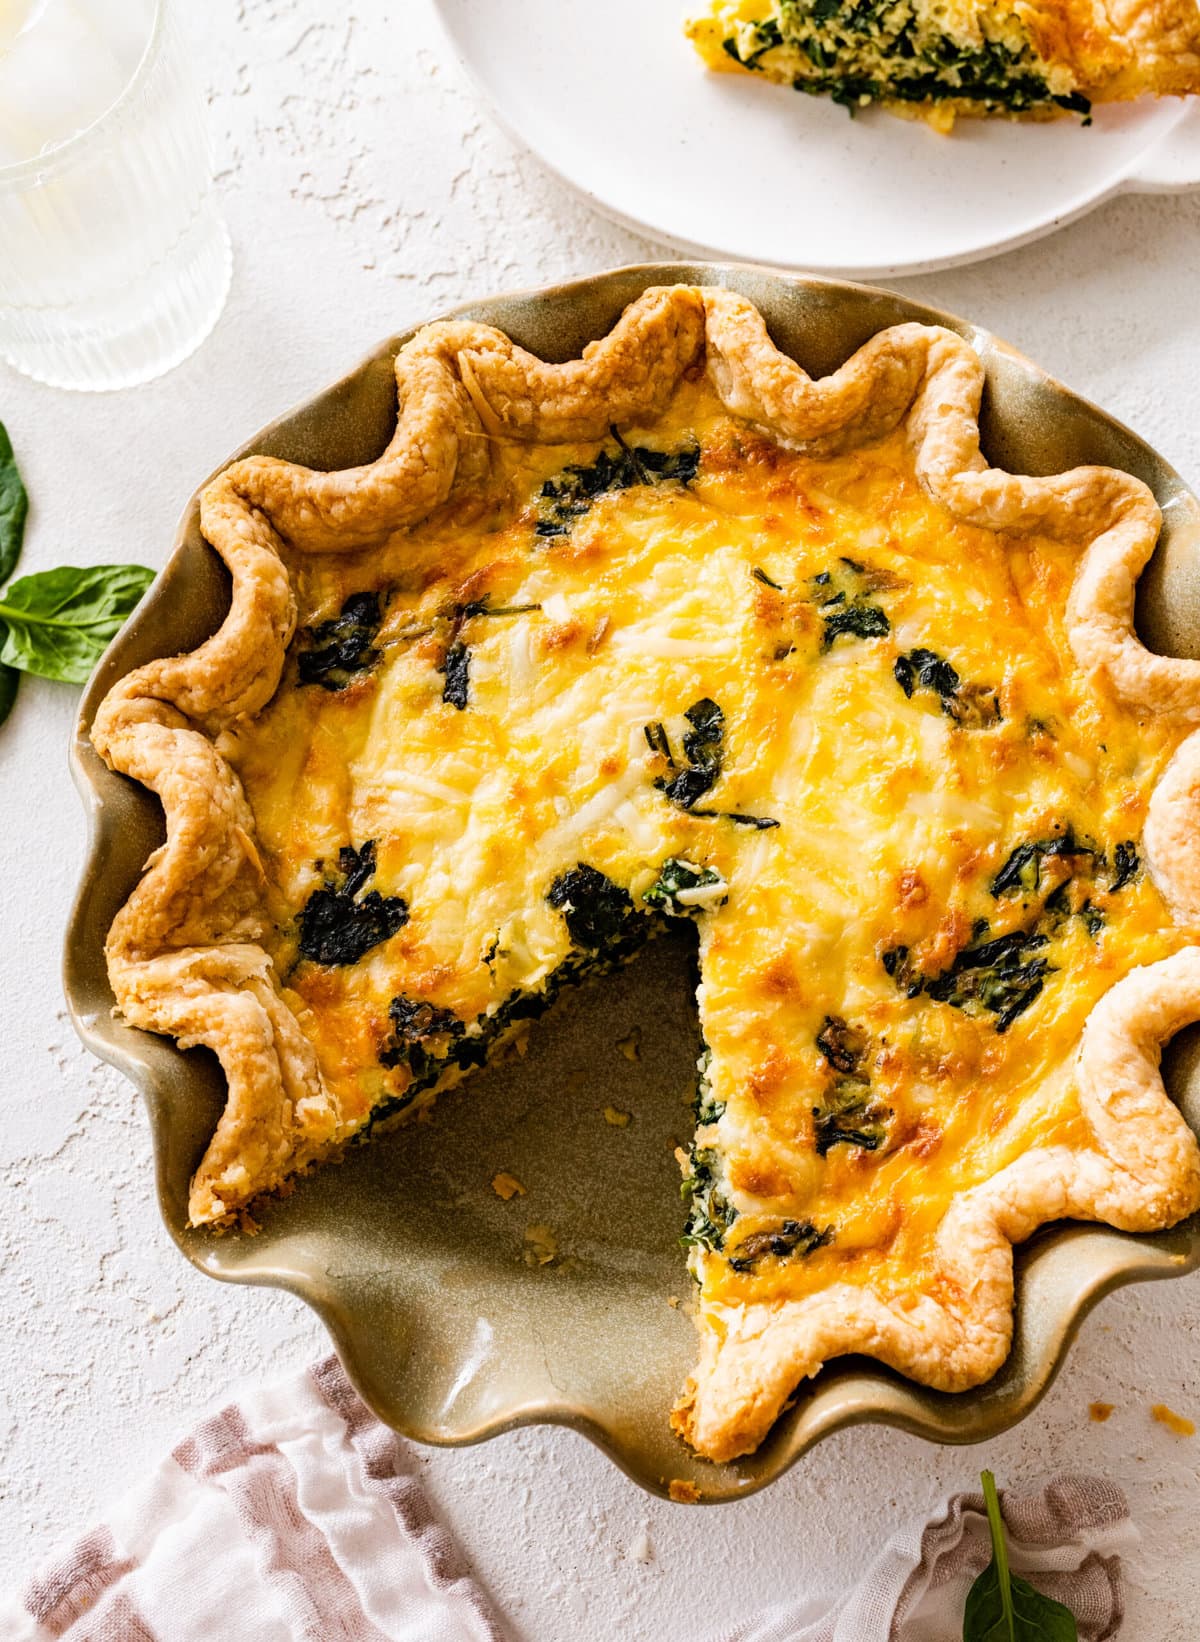 baked spinach quiche recipe out of the oven with golden brown top. Slice taken out.